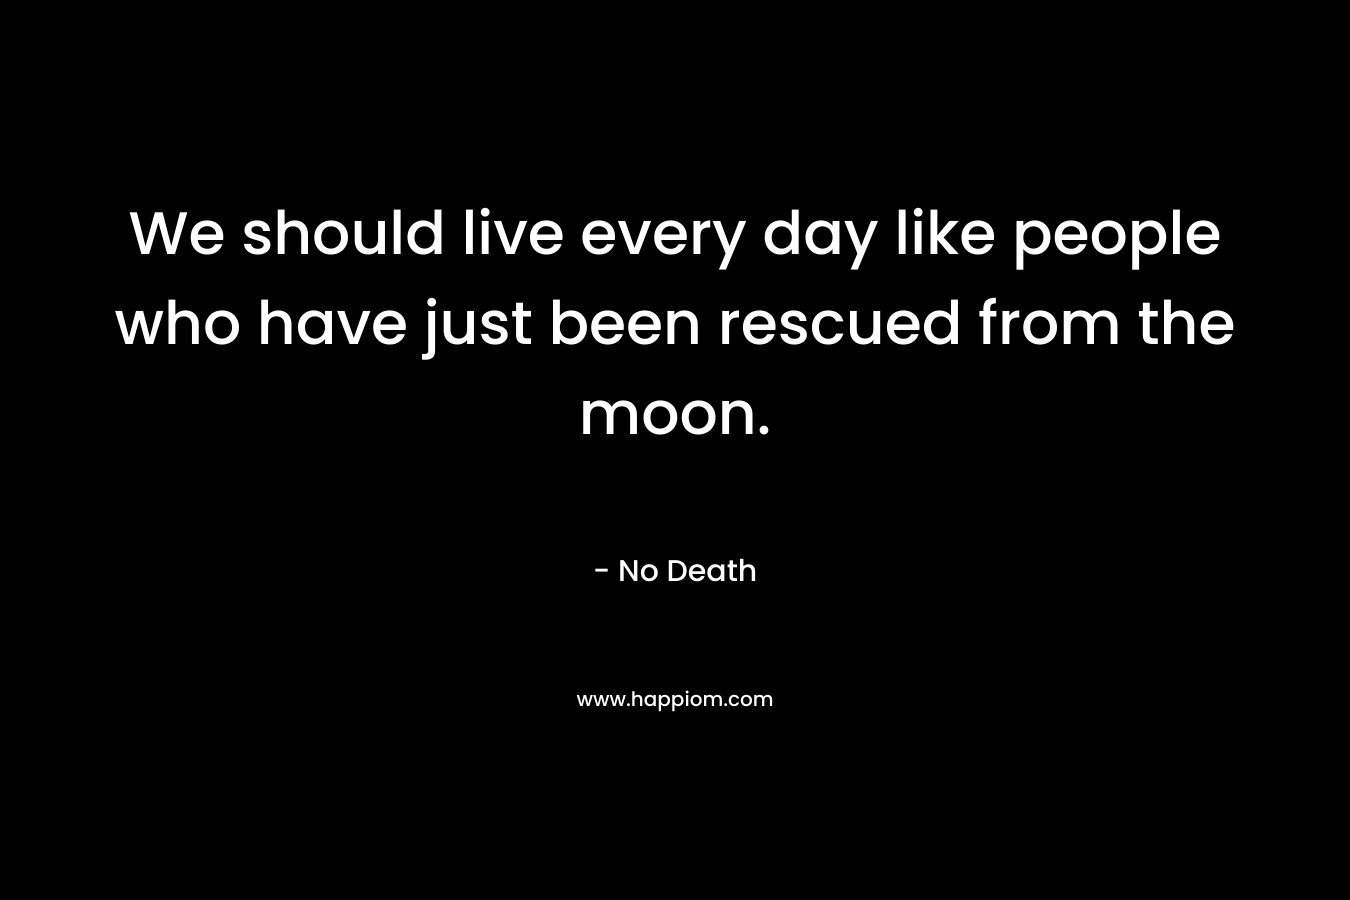 We should live every day like people who have just been rescued from the moon. – No Death